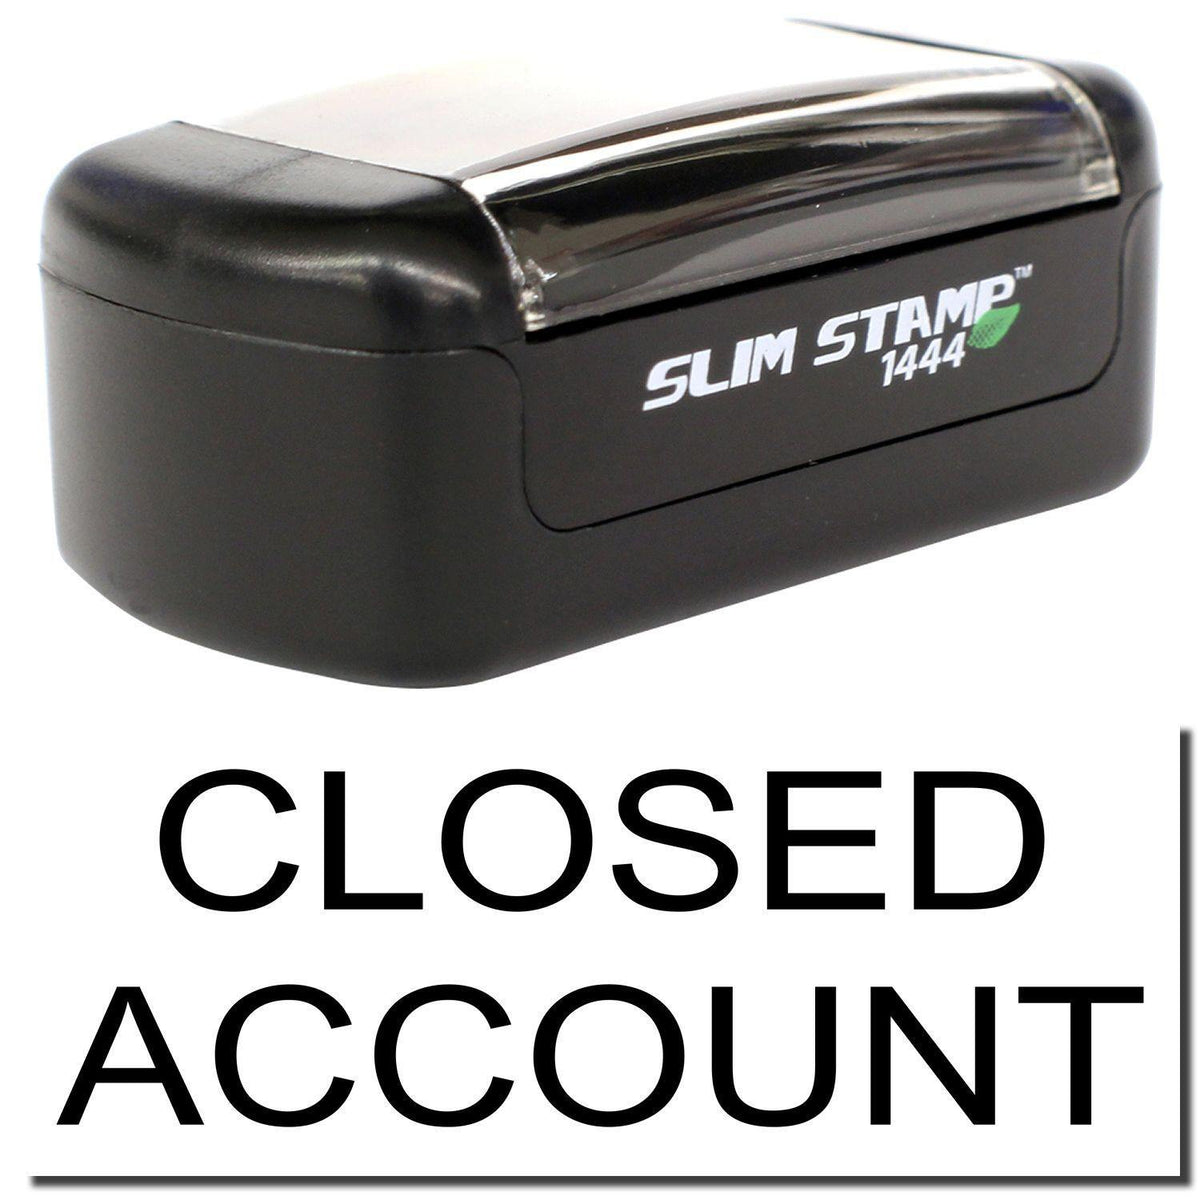 A stock office pre-inked stamp with a stamped image showing how the text &quot;CLOSED ACCOUNT&quot; is displayed after stamping.